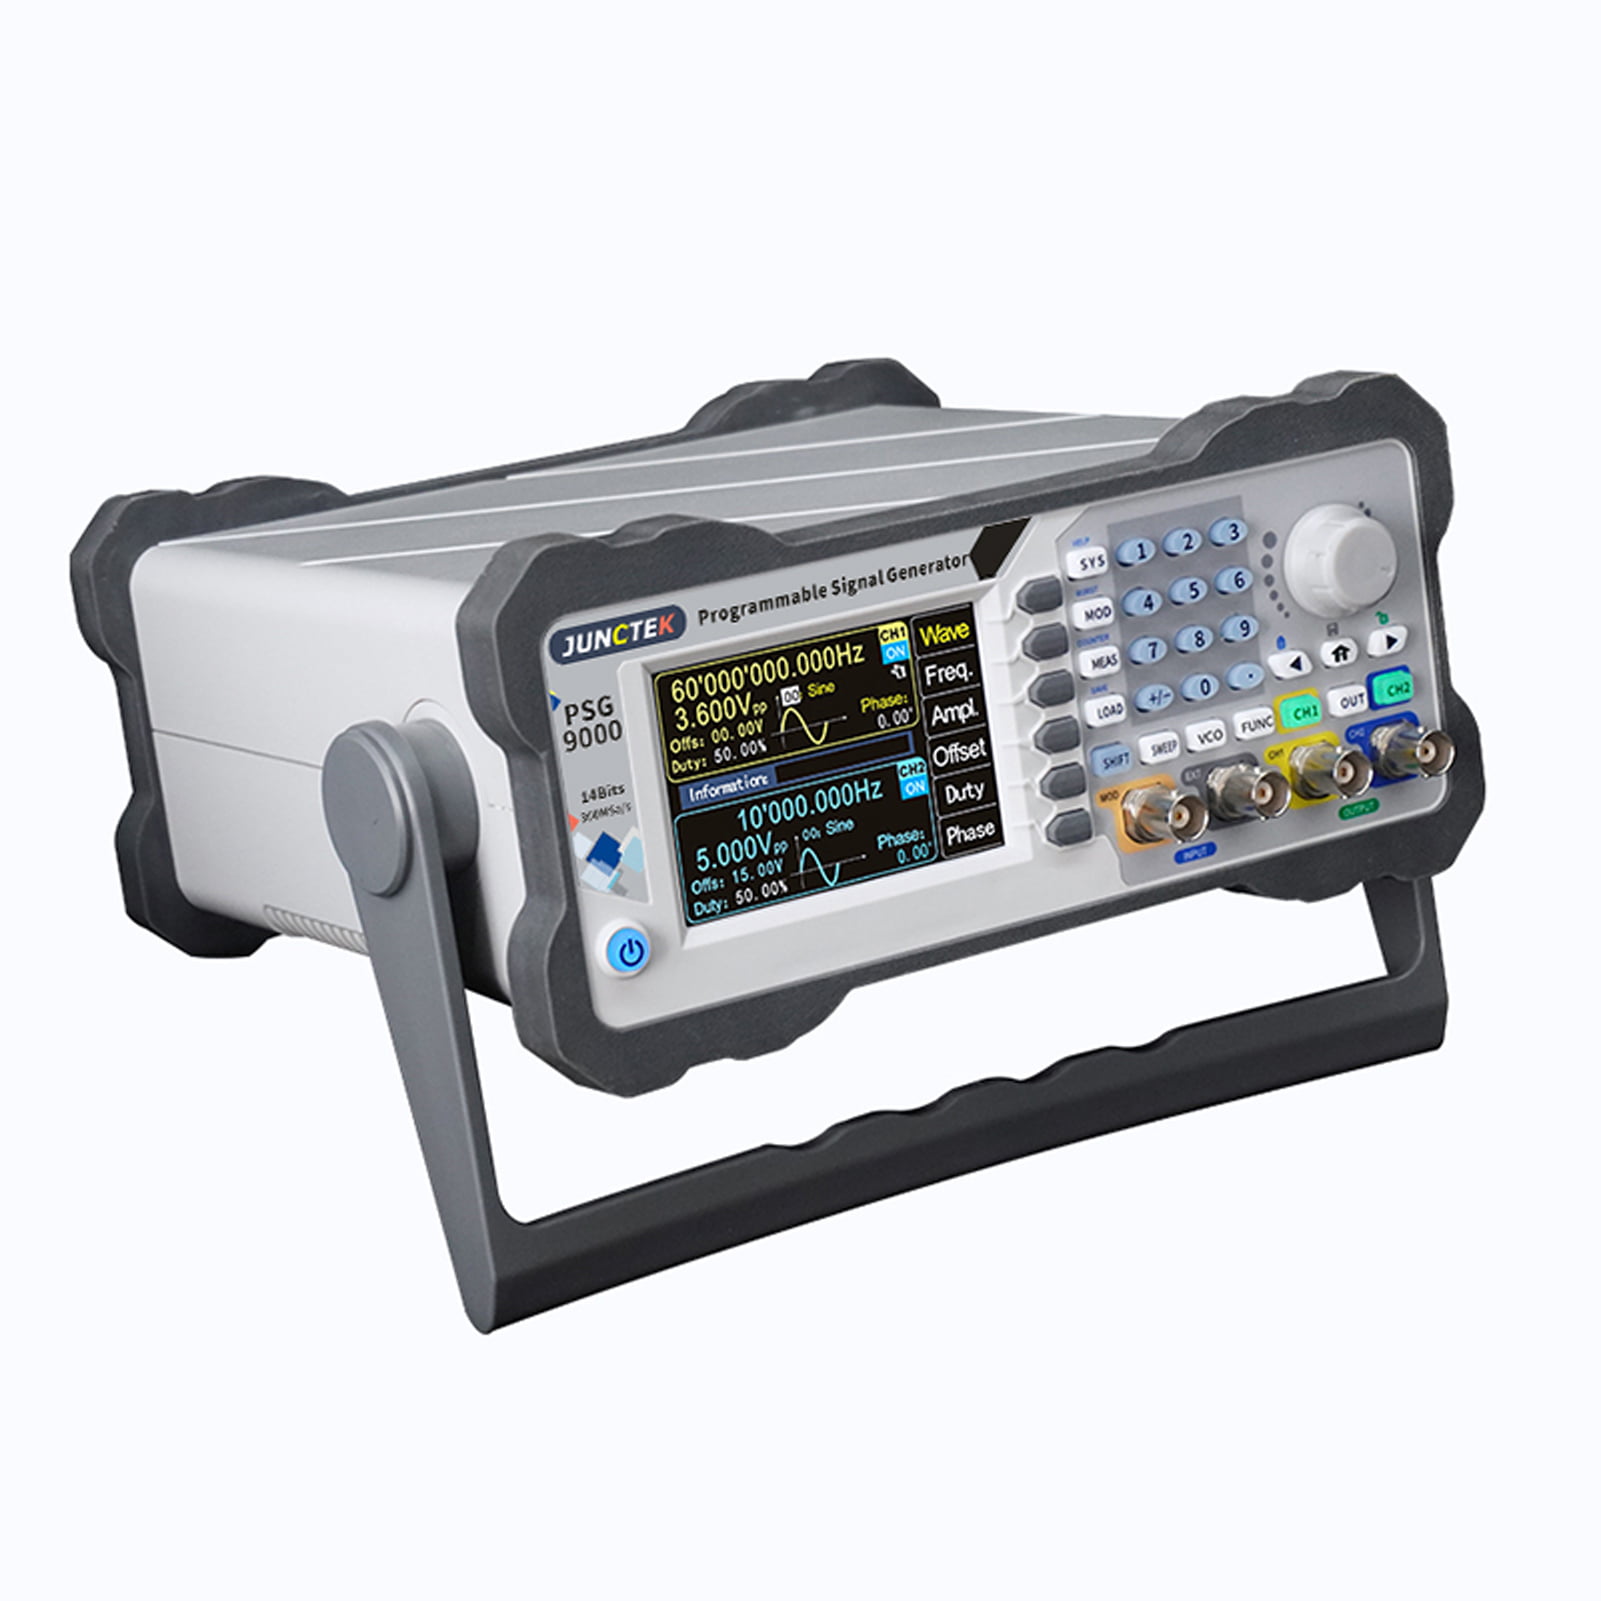 Details about   3.5'' LCD Programmable Function Signal Generator 80MHz 300MSA/S Sampling Rate 